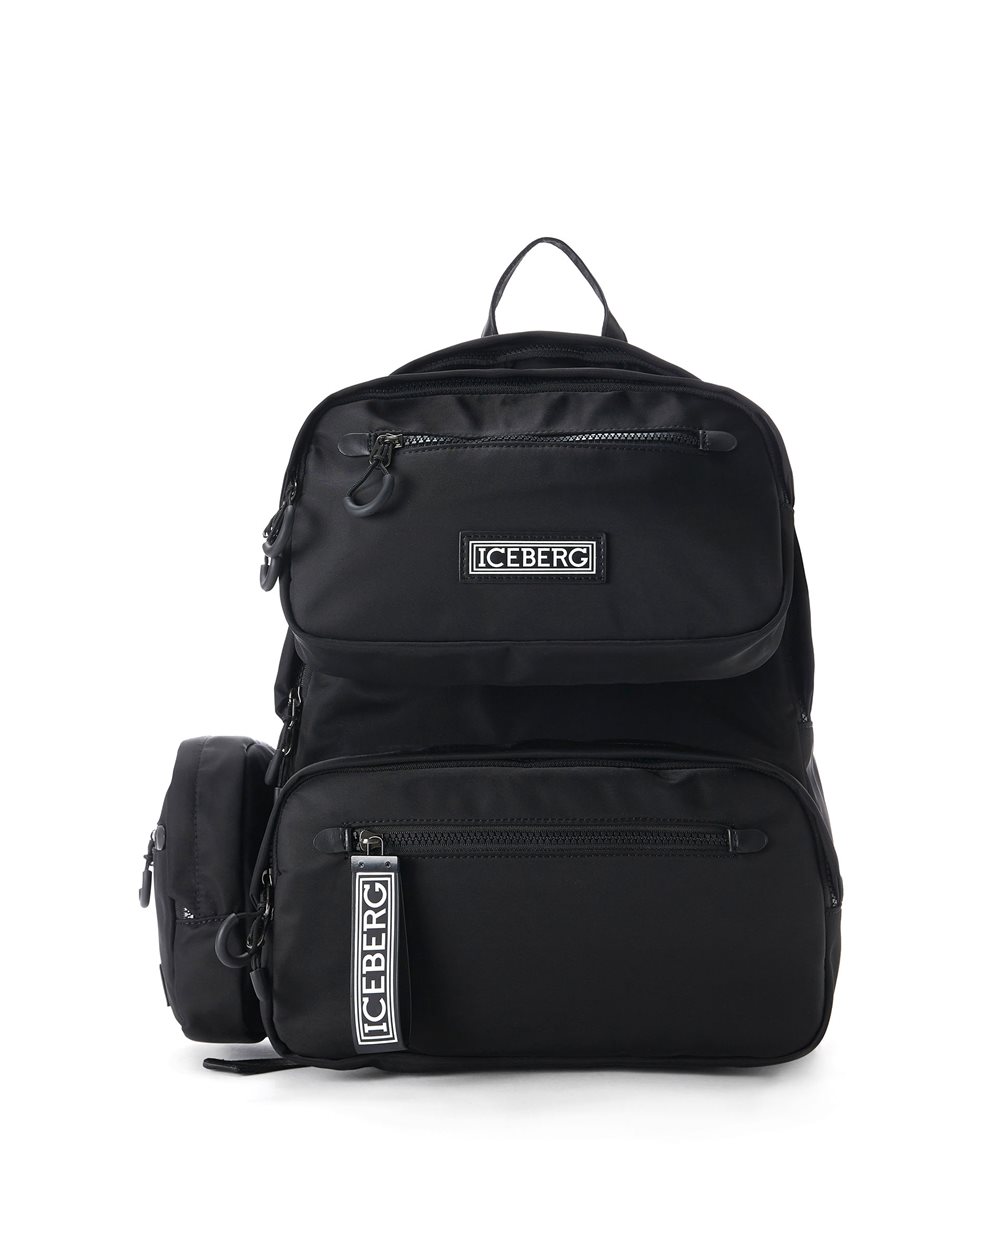 Multi-pocket backpack in nylon - ( SECONDO STEP IT ) PROMO SALDI UP TO 50% | Iceberg - Official Website